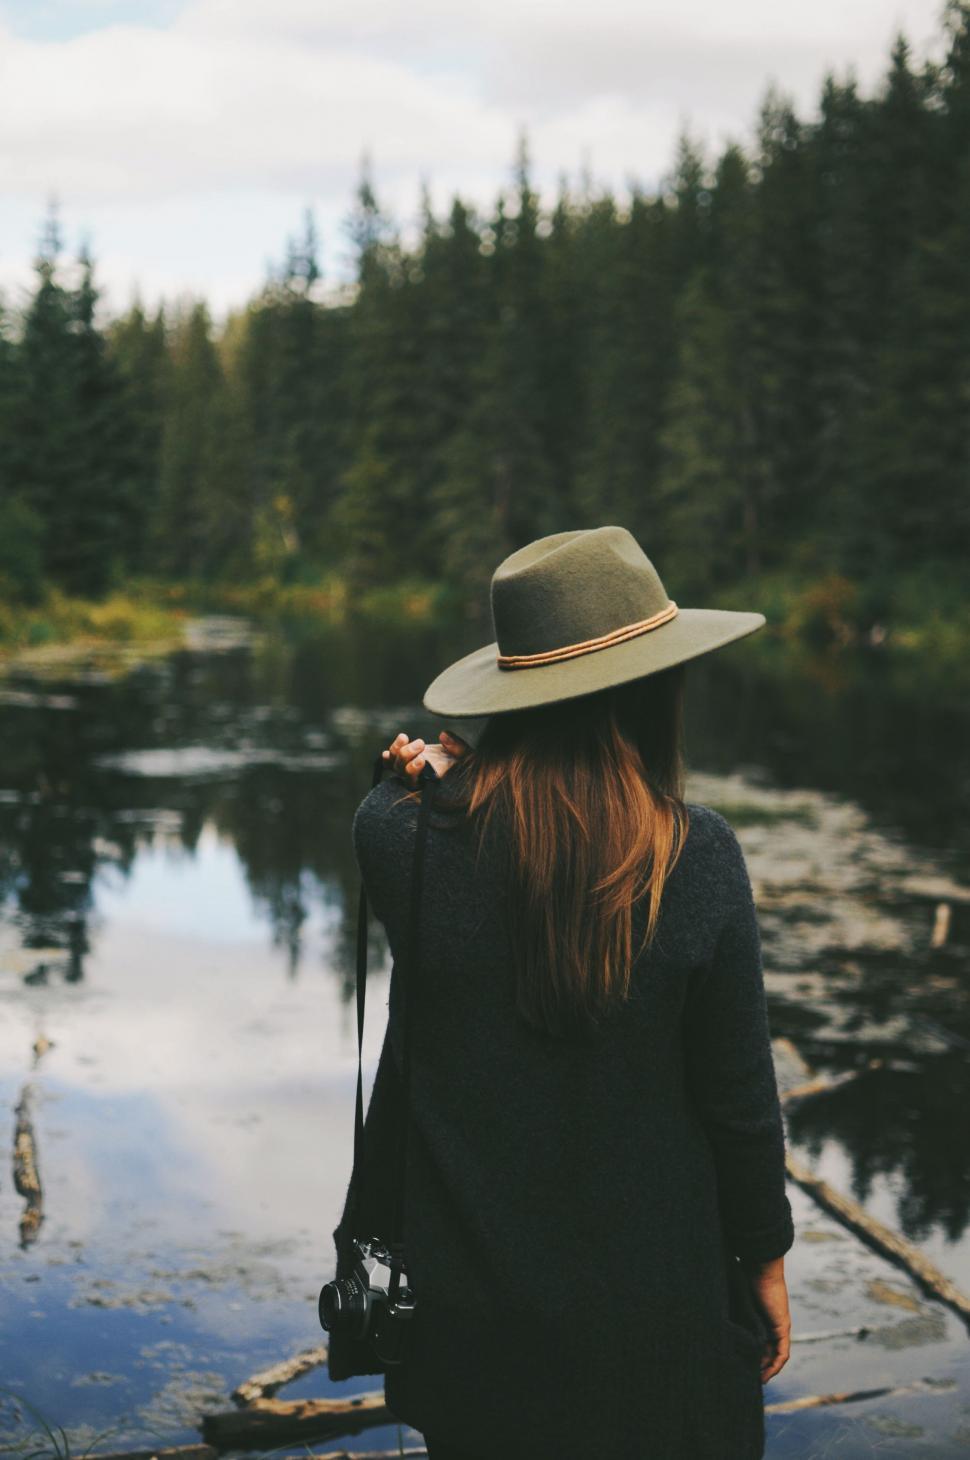 Free Image of Woman in Hat Standing by Lake 